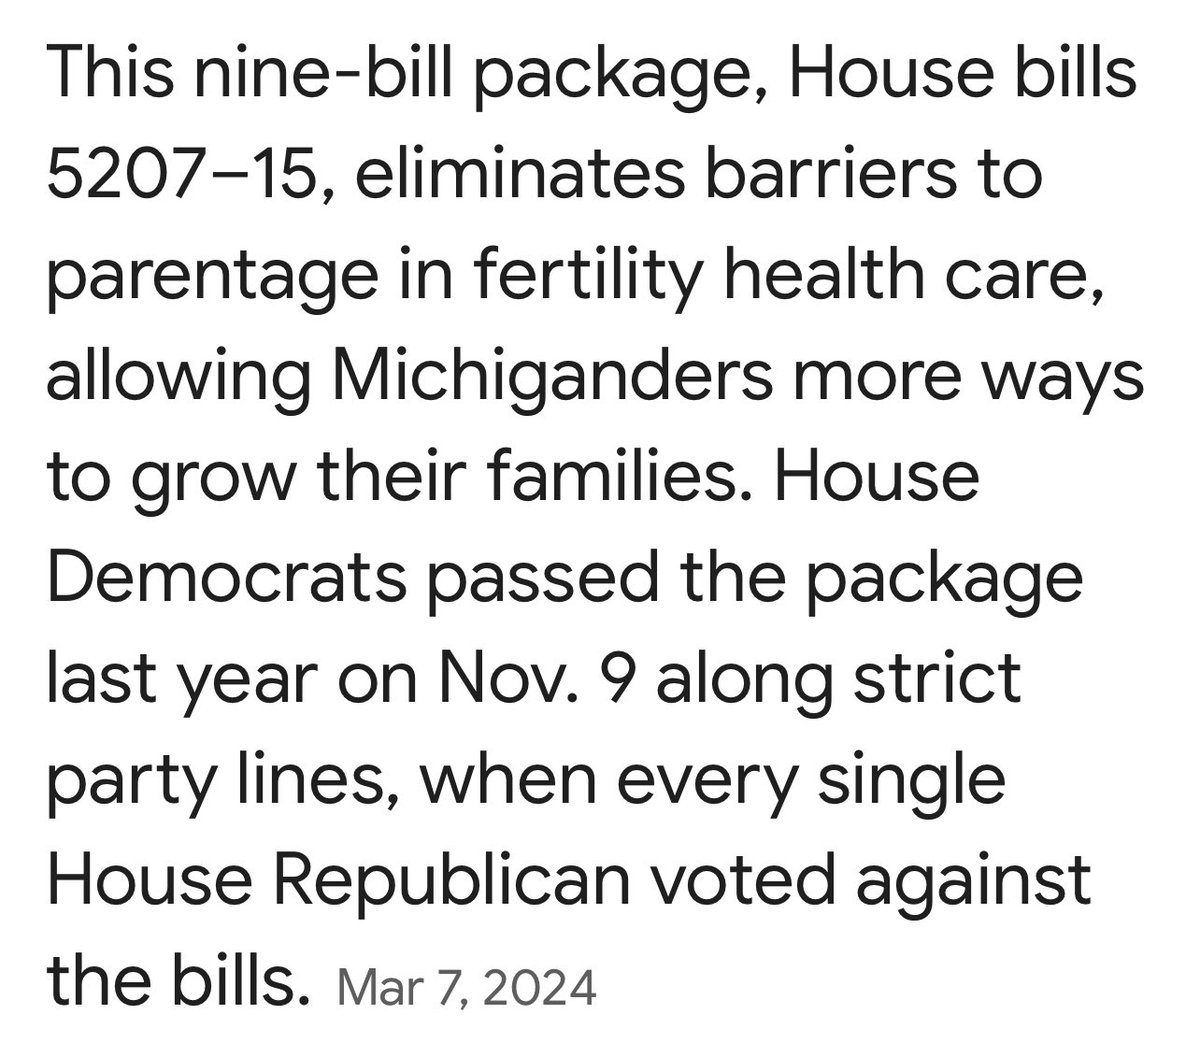 If you are one of the 13,000 Michigan couples who applied for the contest on @MojoInTheMorn to have your IVF treatments paid for, you should know that every single MI House Republican voted against protecting IVF. Was just listening and one happy Chaldean couple just won and we…